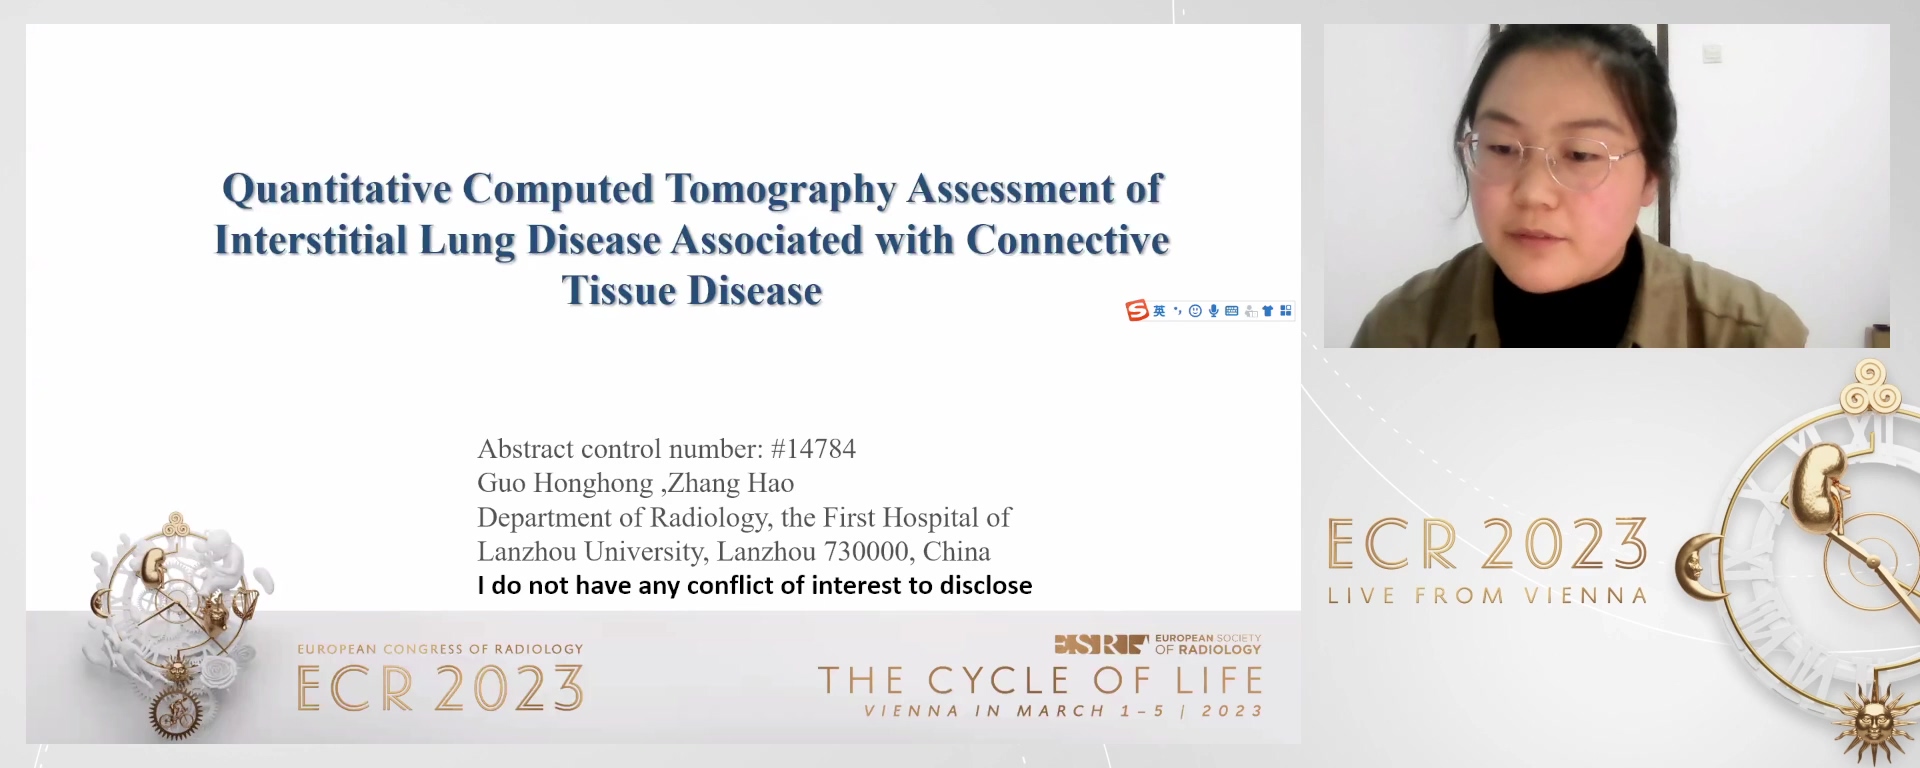 Quantitative computed tomography assessment of interstitial lung disease associated with connective tissue disease - Honghong  Guo, Lan Zhou / CN